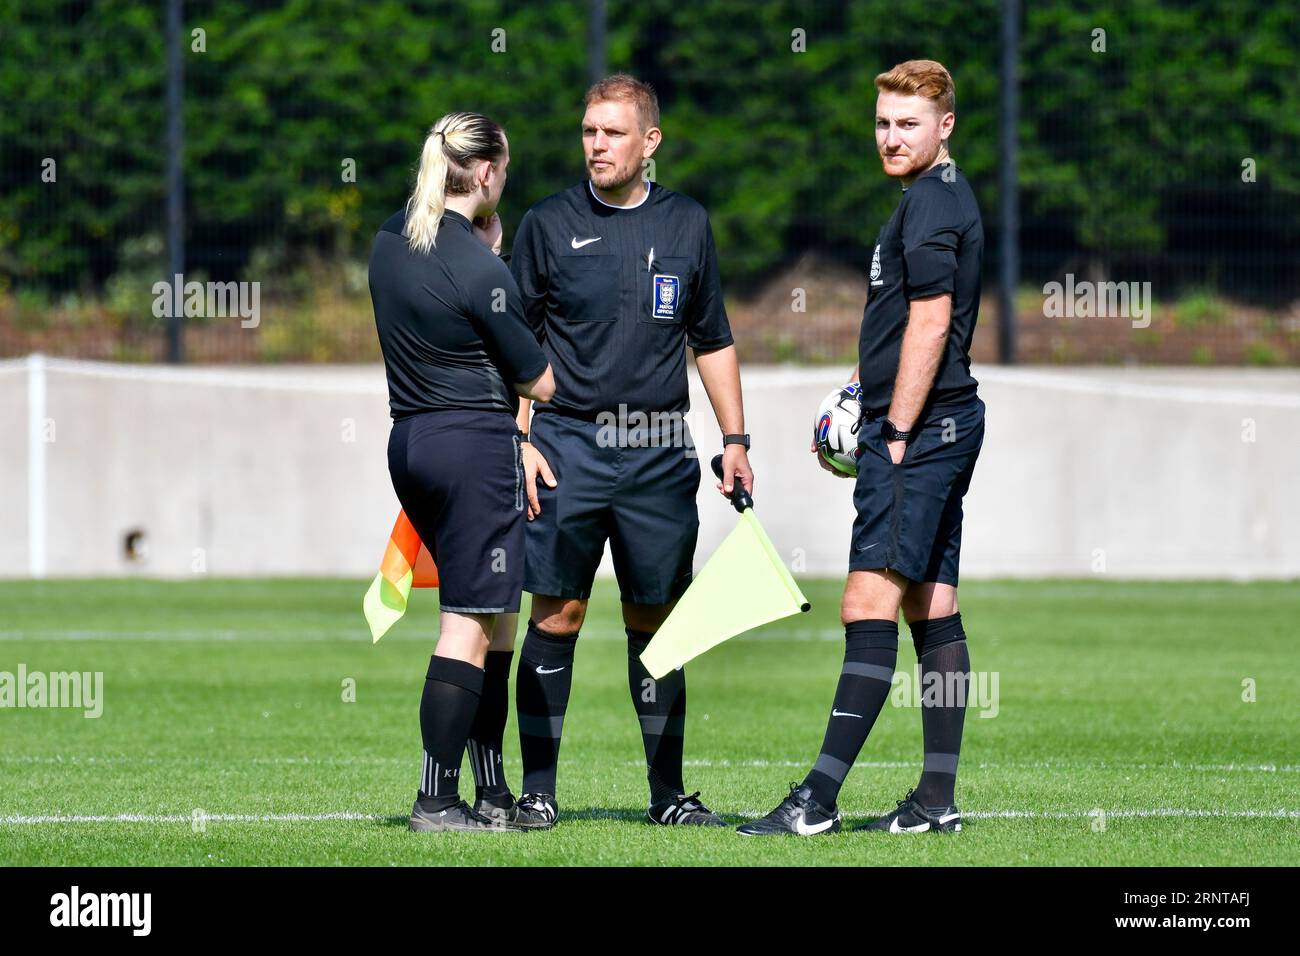 Swansea, Wales. 2 September 2023. Assistant Referee Alex Setchell (left), Assistant Referee Joe Drew and Match Referee William Payne during the Under 18 Professional Development League Cup game between Swansea City and Cardiff City at the Swansea City Academy in Swansea, Wales, UK on 2 September 2023. Credit: Duncan Thomas/Majestic Media/Alamy Live News. Stock Photo